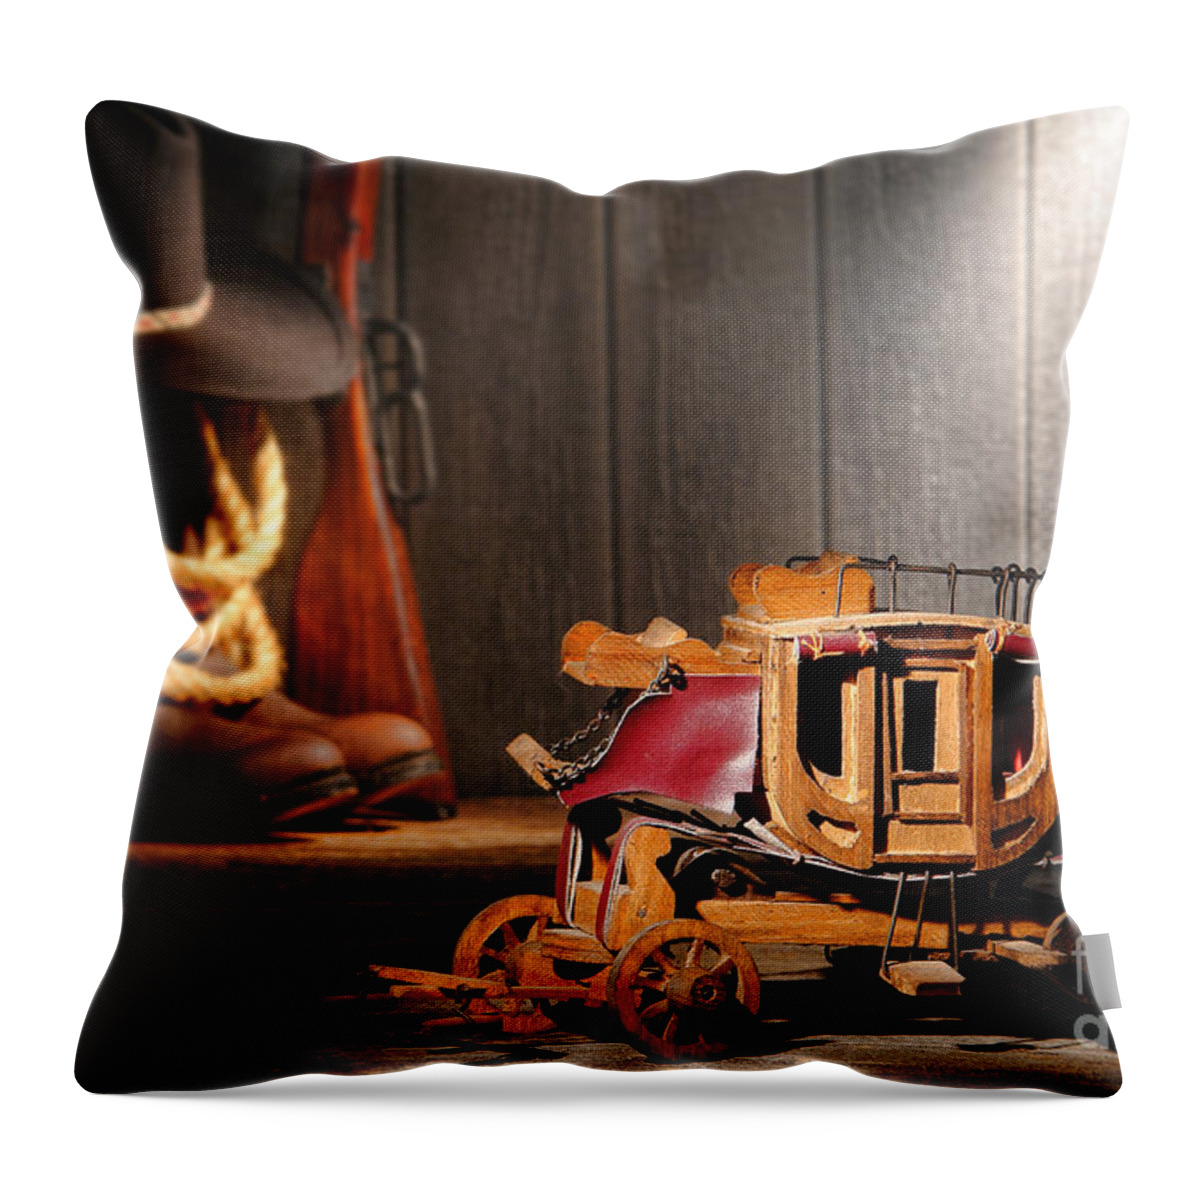 Stagecoach Throw Pillow featuring the photograph Stagecoach Dream by Olivier Le Queinec